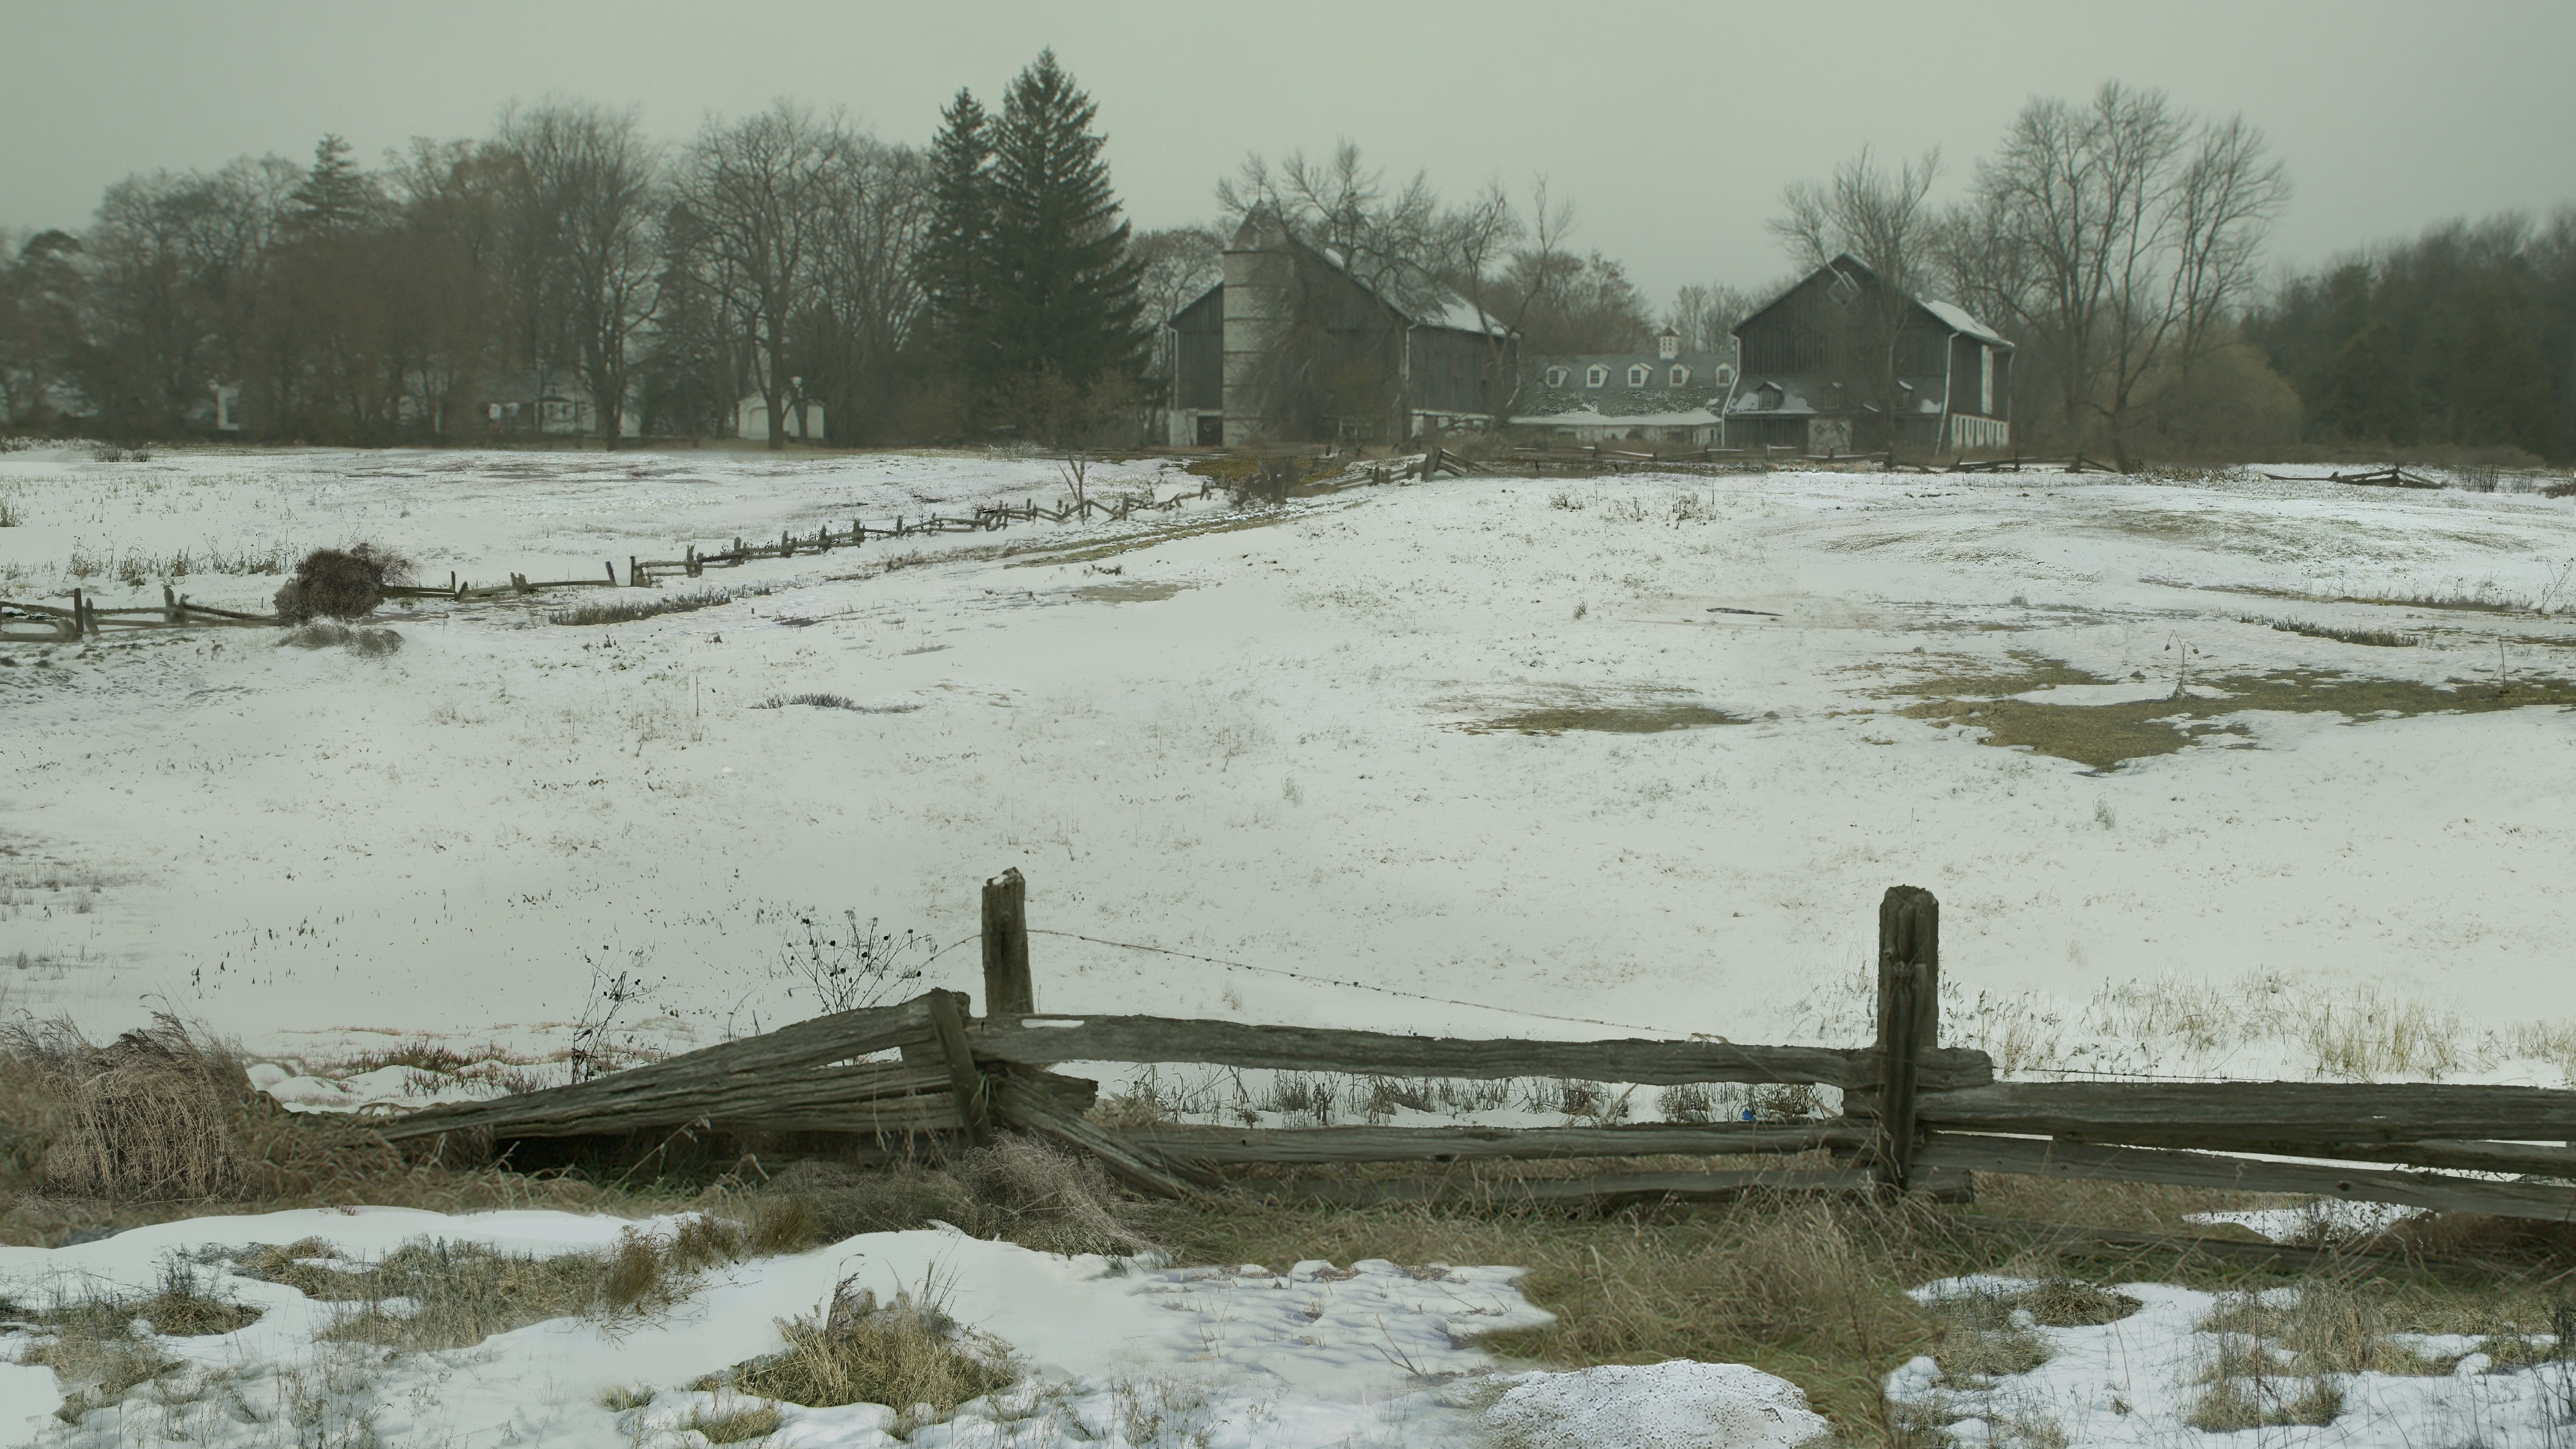 shot from orphan black 
adding snow